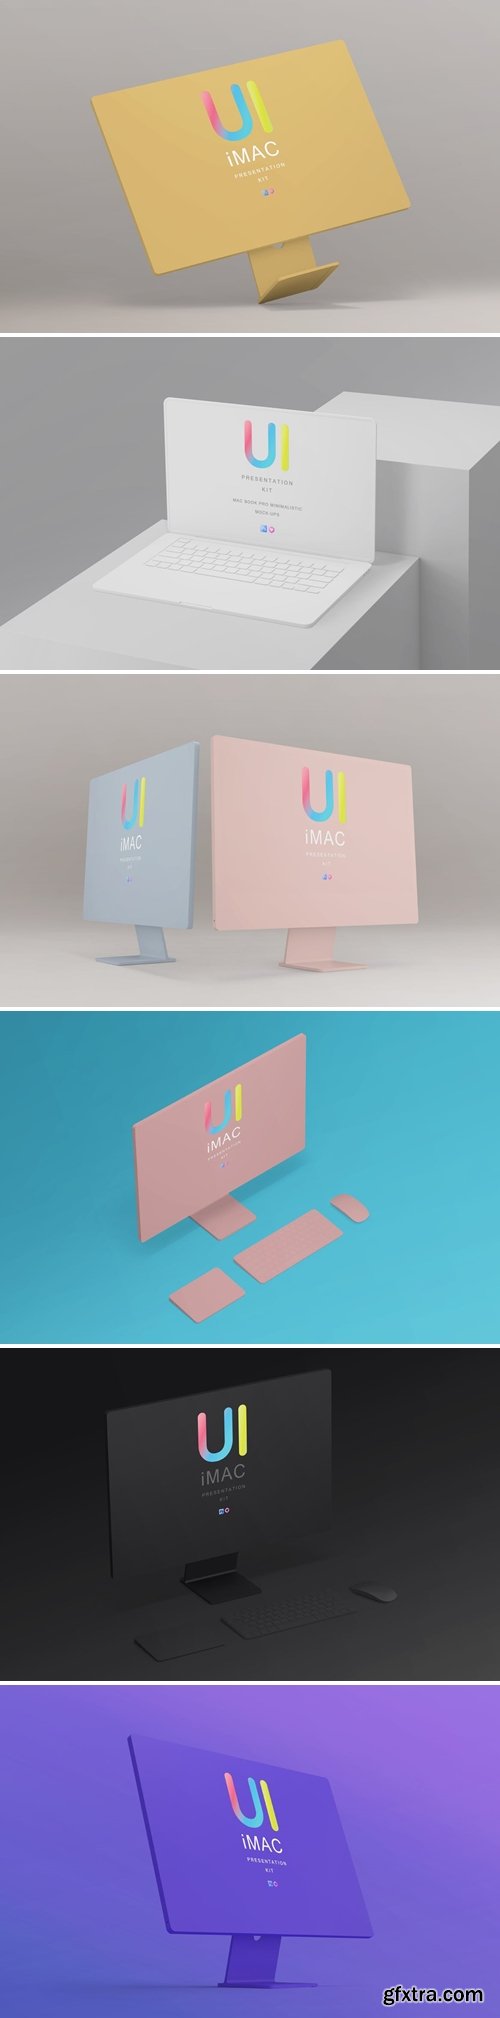 Clay Responsive Devices Mock-Ups